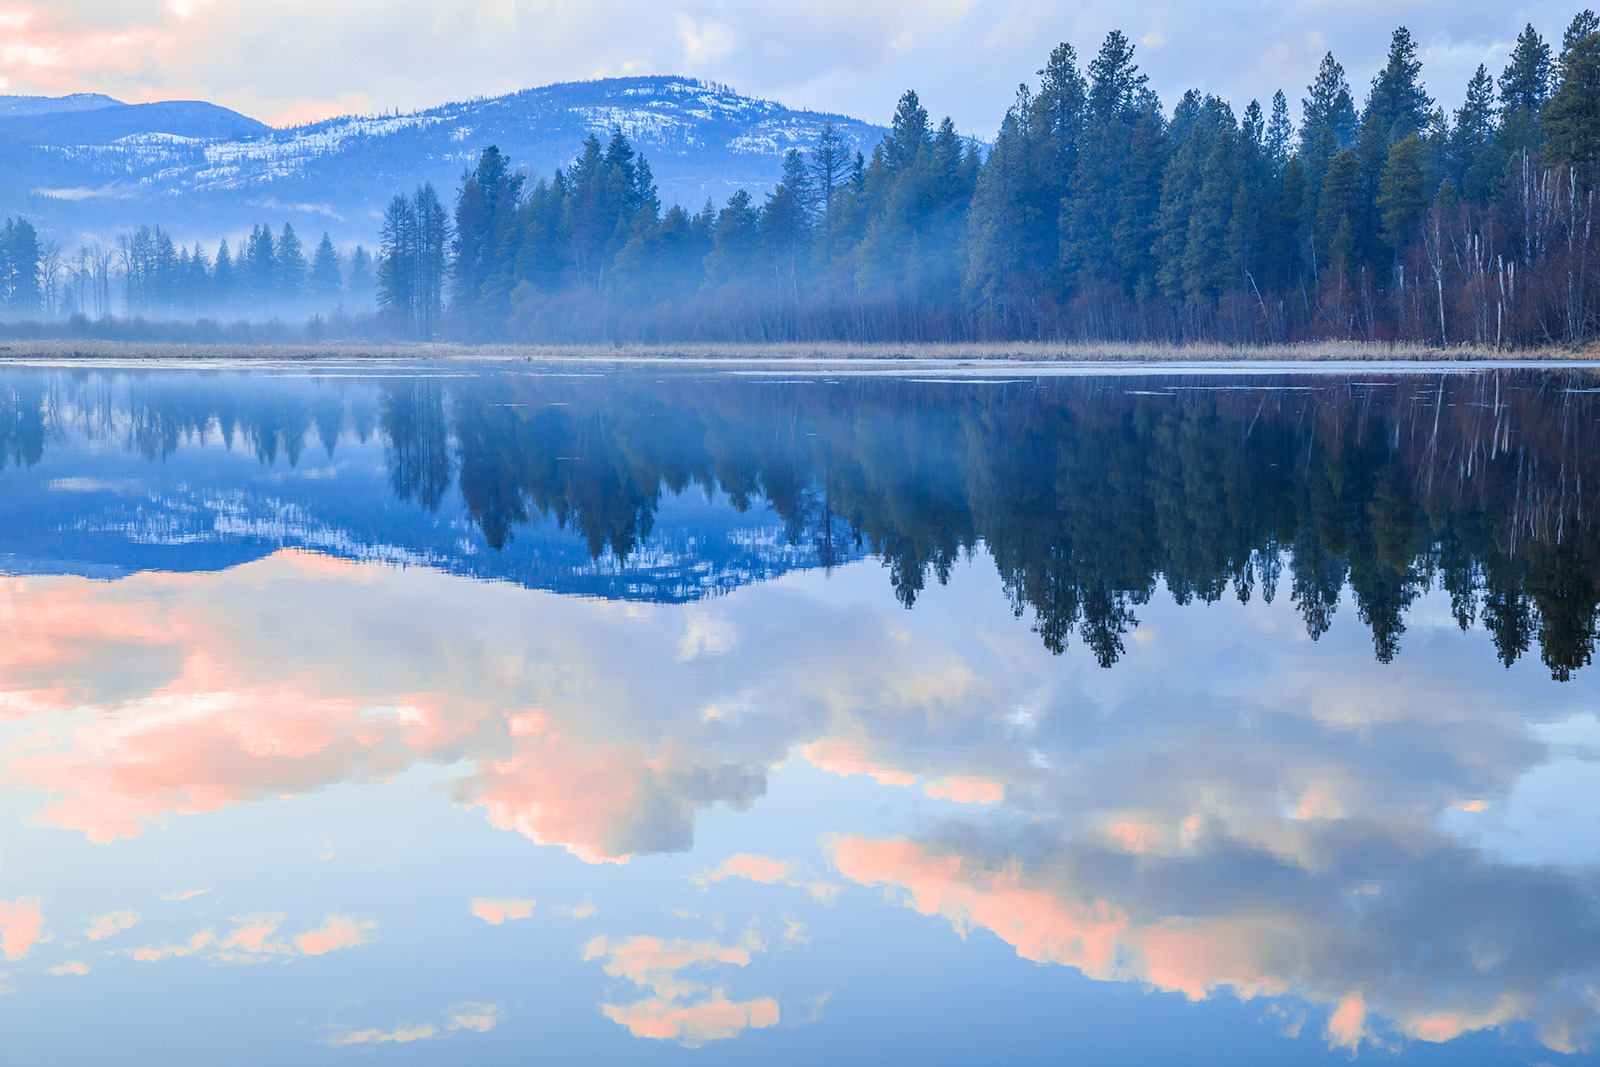 A smooth lake reflects a forested and snowy mountain vista.